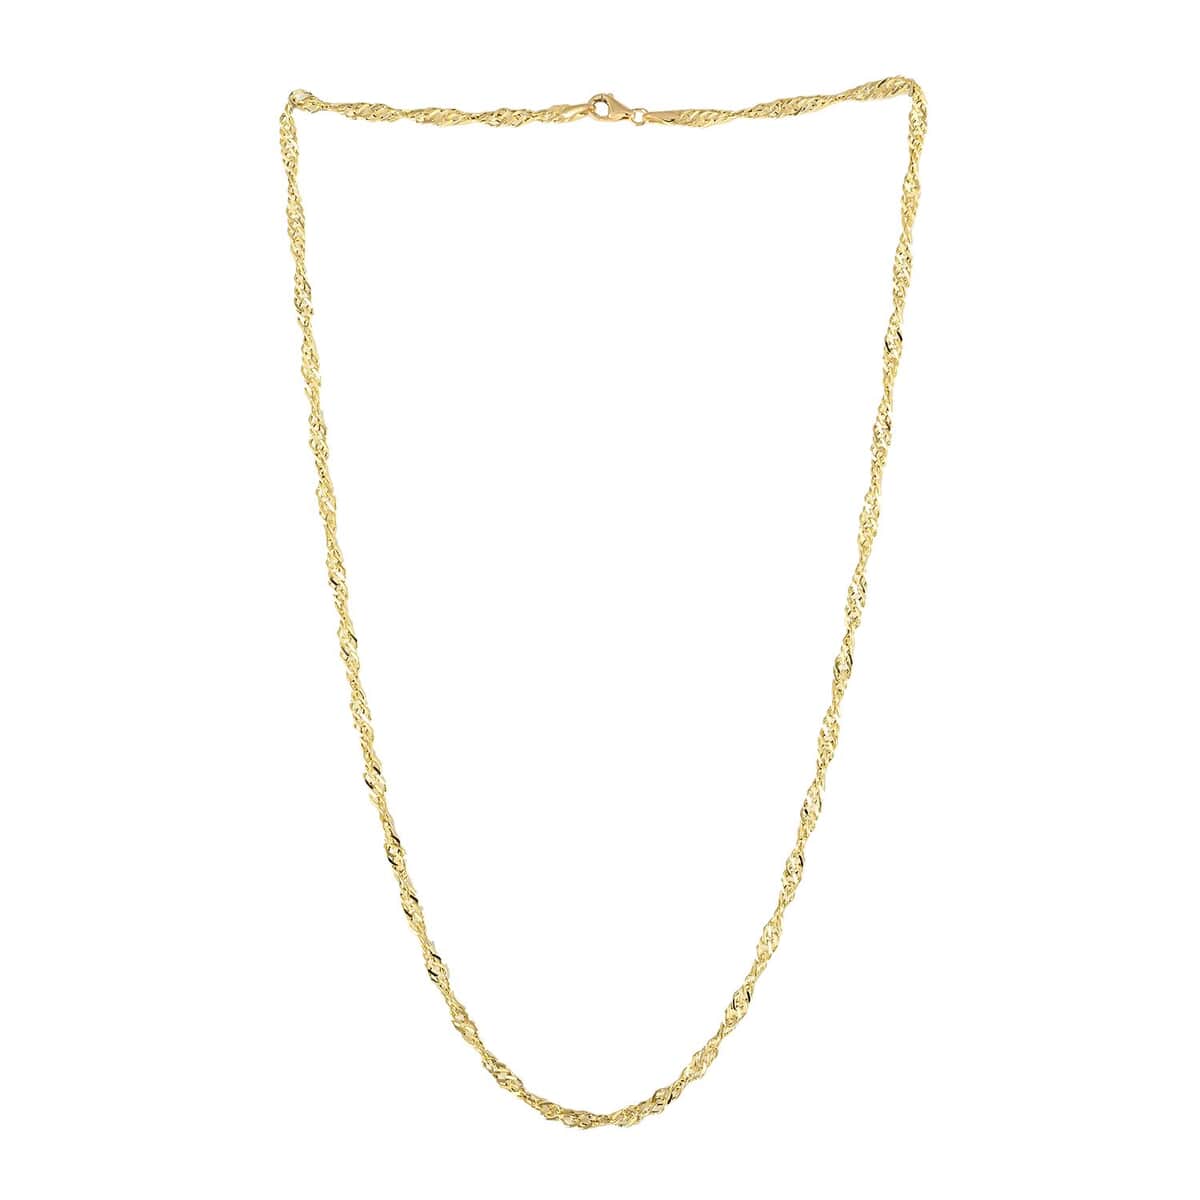 Italian Designer Singapore Necklace 14K Yellow Gold, Gold Chain, Chain Necklace (18 Inches) image number 1